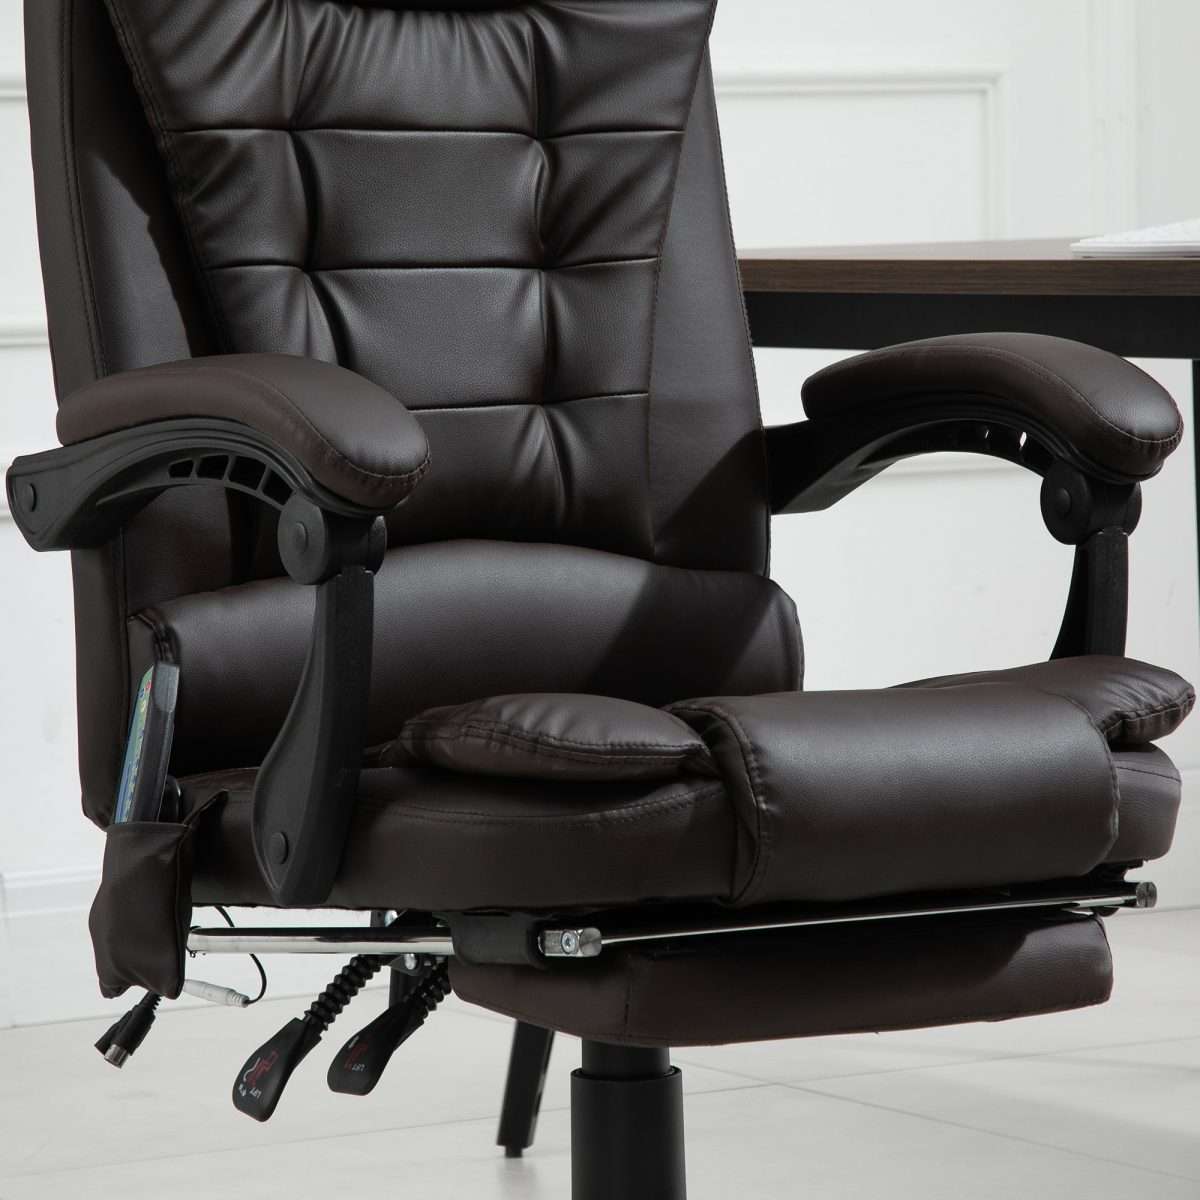 Massage Office Chair w/ Heating Function Reclining Back Adjustable ...